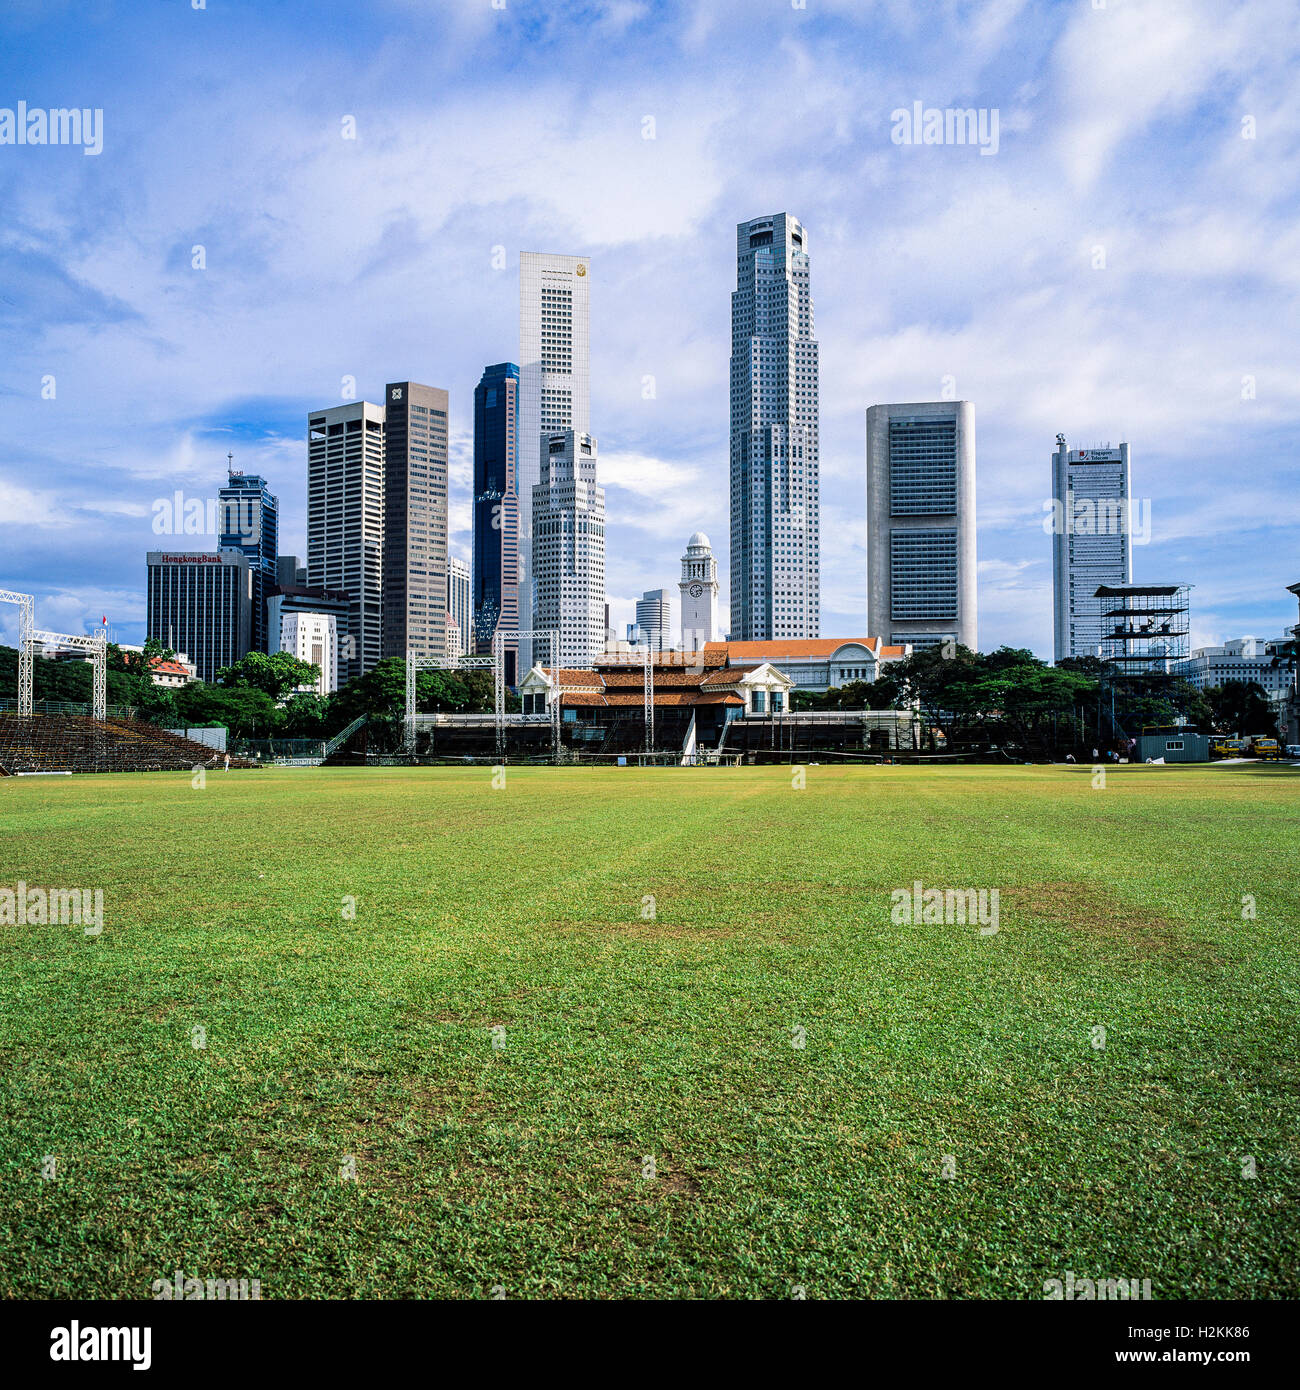 Padang cricket ground and Central business district skyline with skyscrapers, Singapore Stock Photo